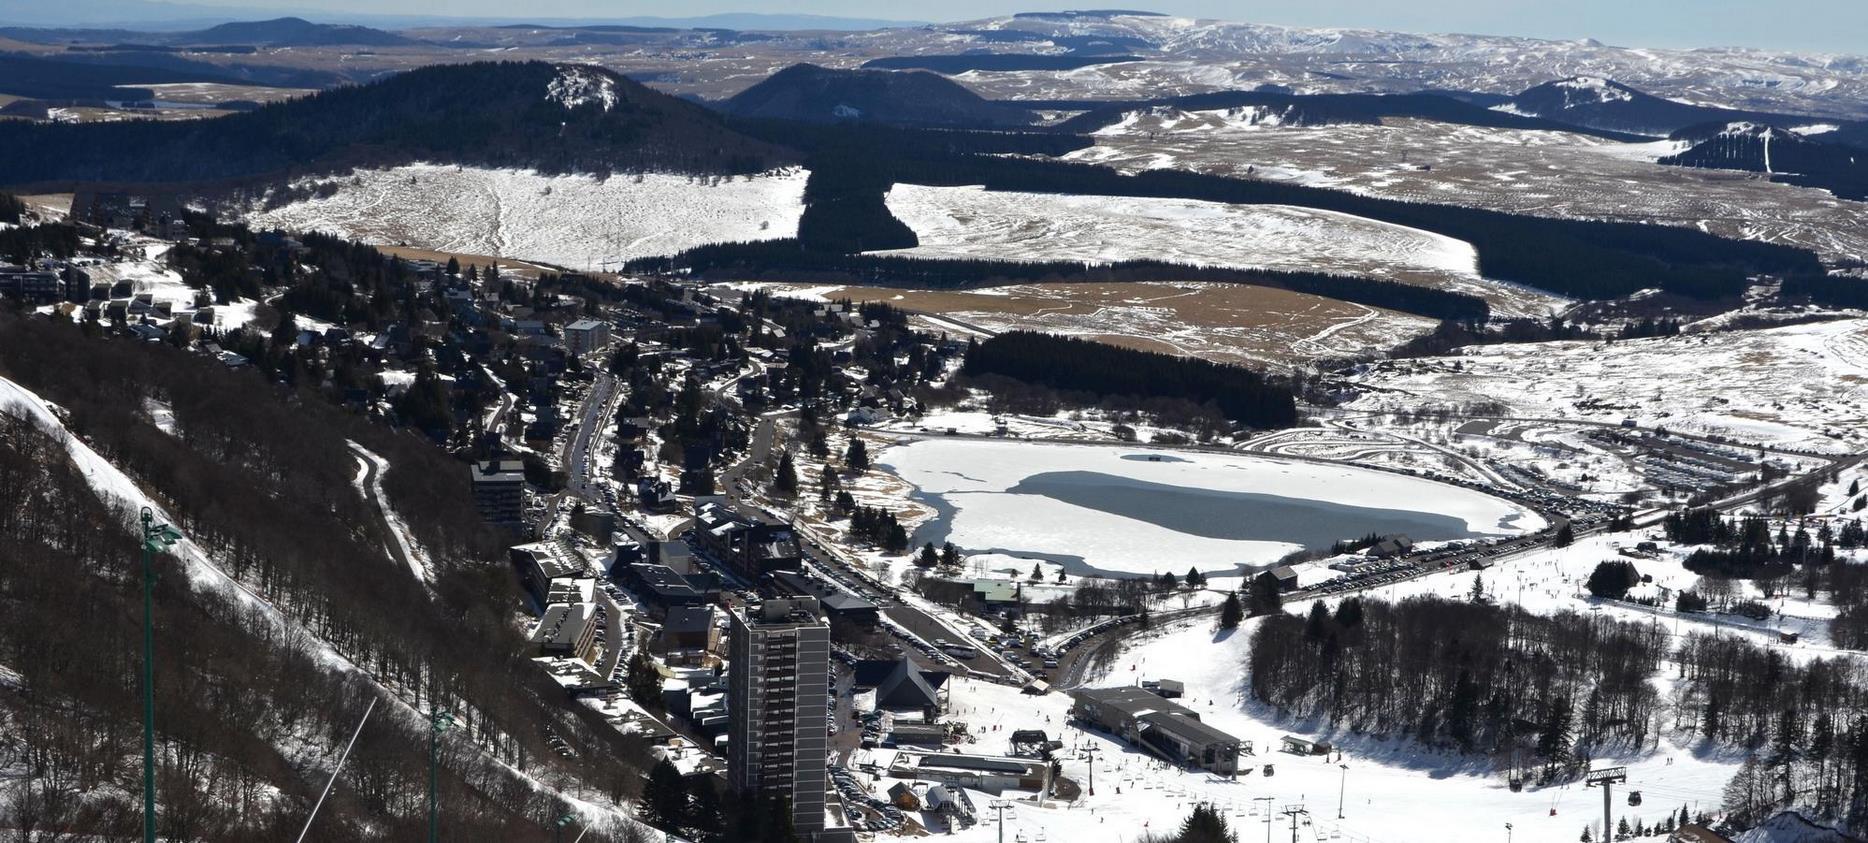 Super Besse - view of the resort on the ski slopes